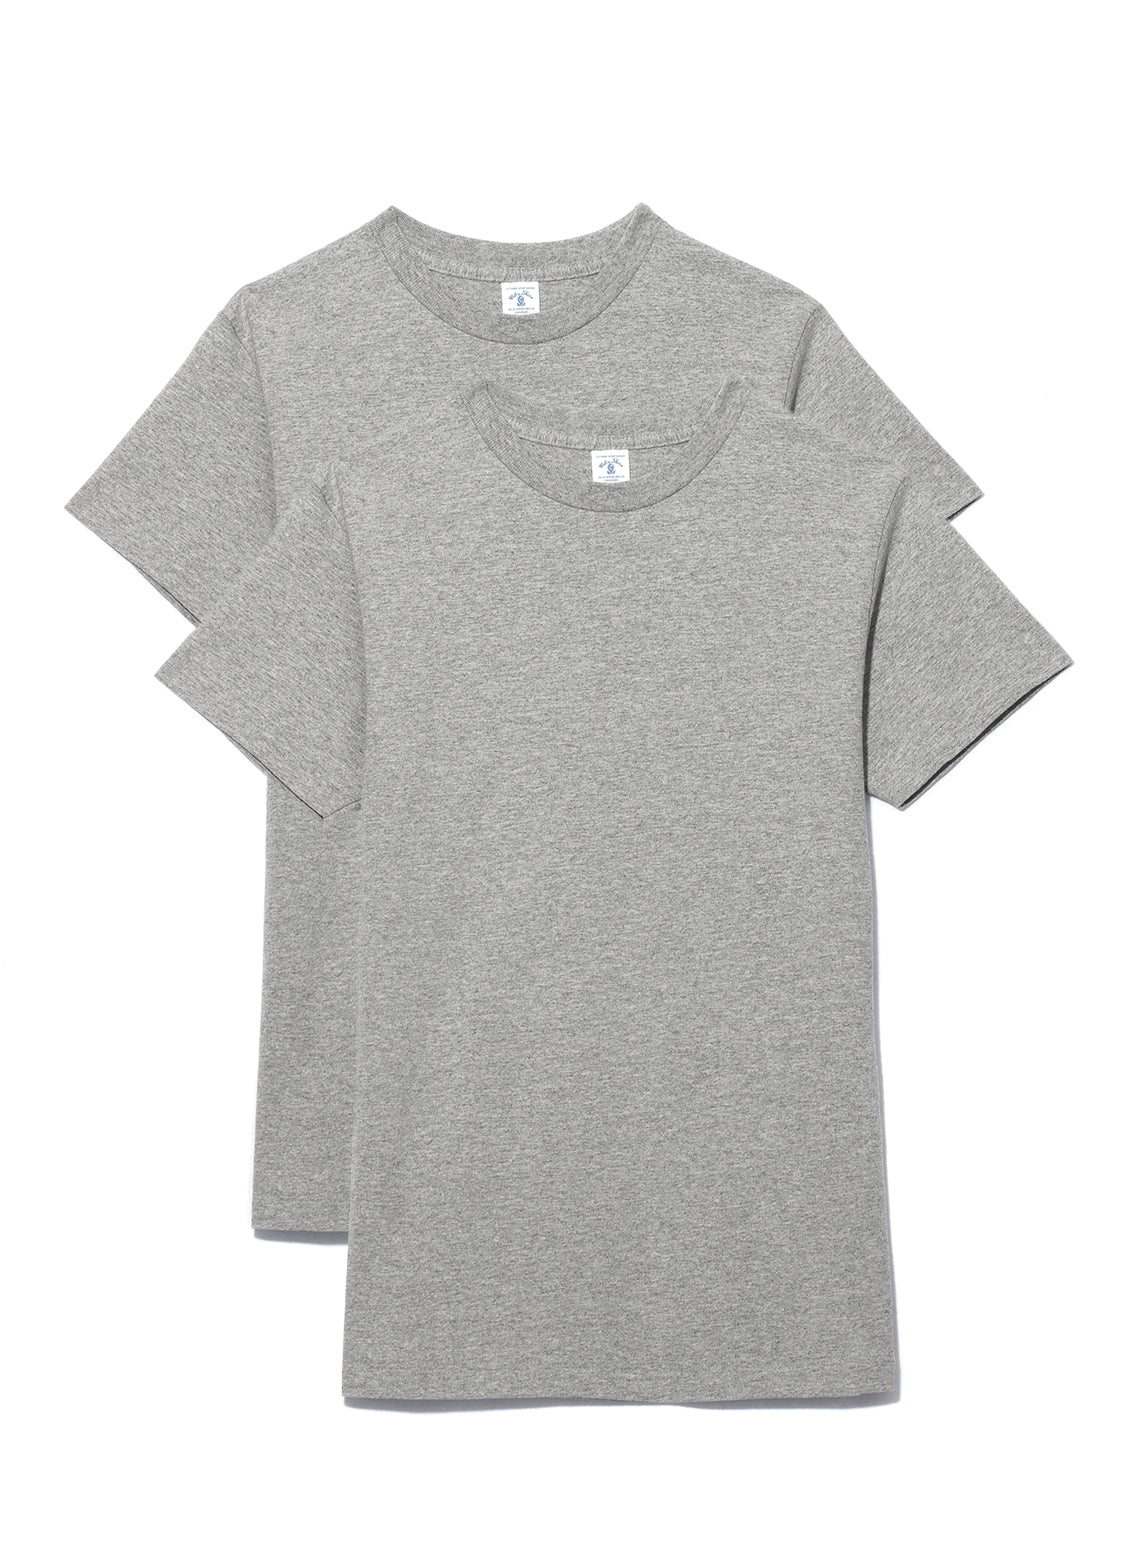 Pack 2 Tee Shirts Col Rond Gris Chiné